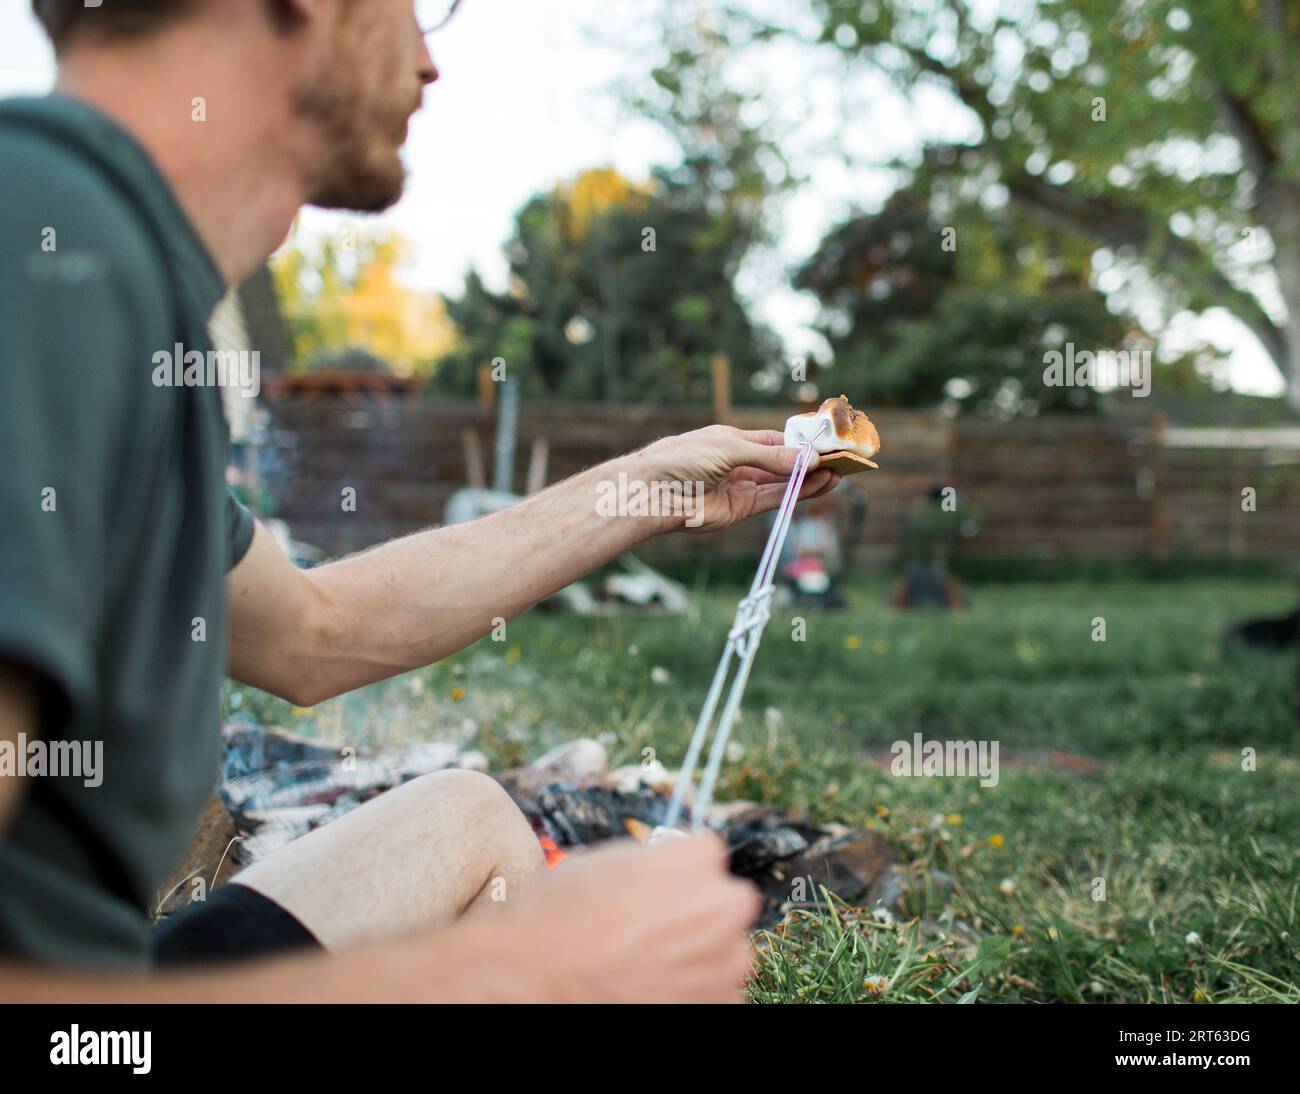 Man assembles s’more with campfire behind Stock Photo